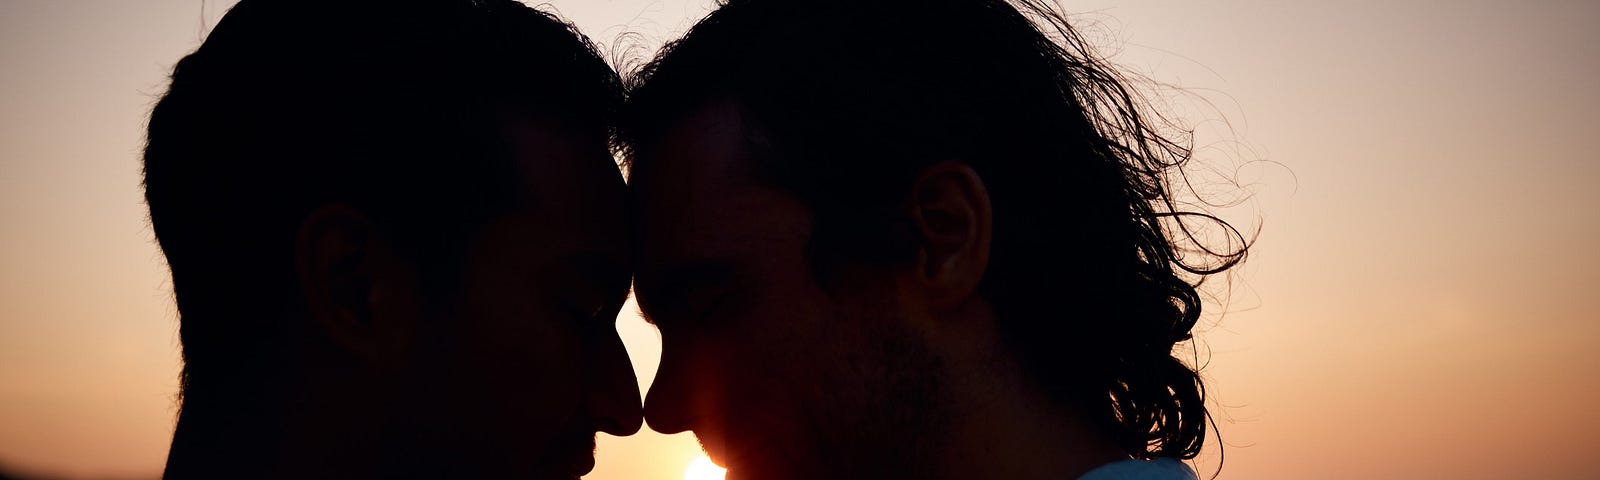 A silhouette of two men with their foreheads resting together and their noses touching with the sun setting in the background.